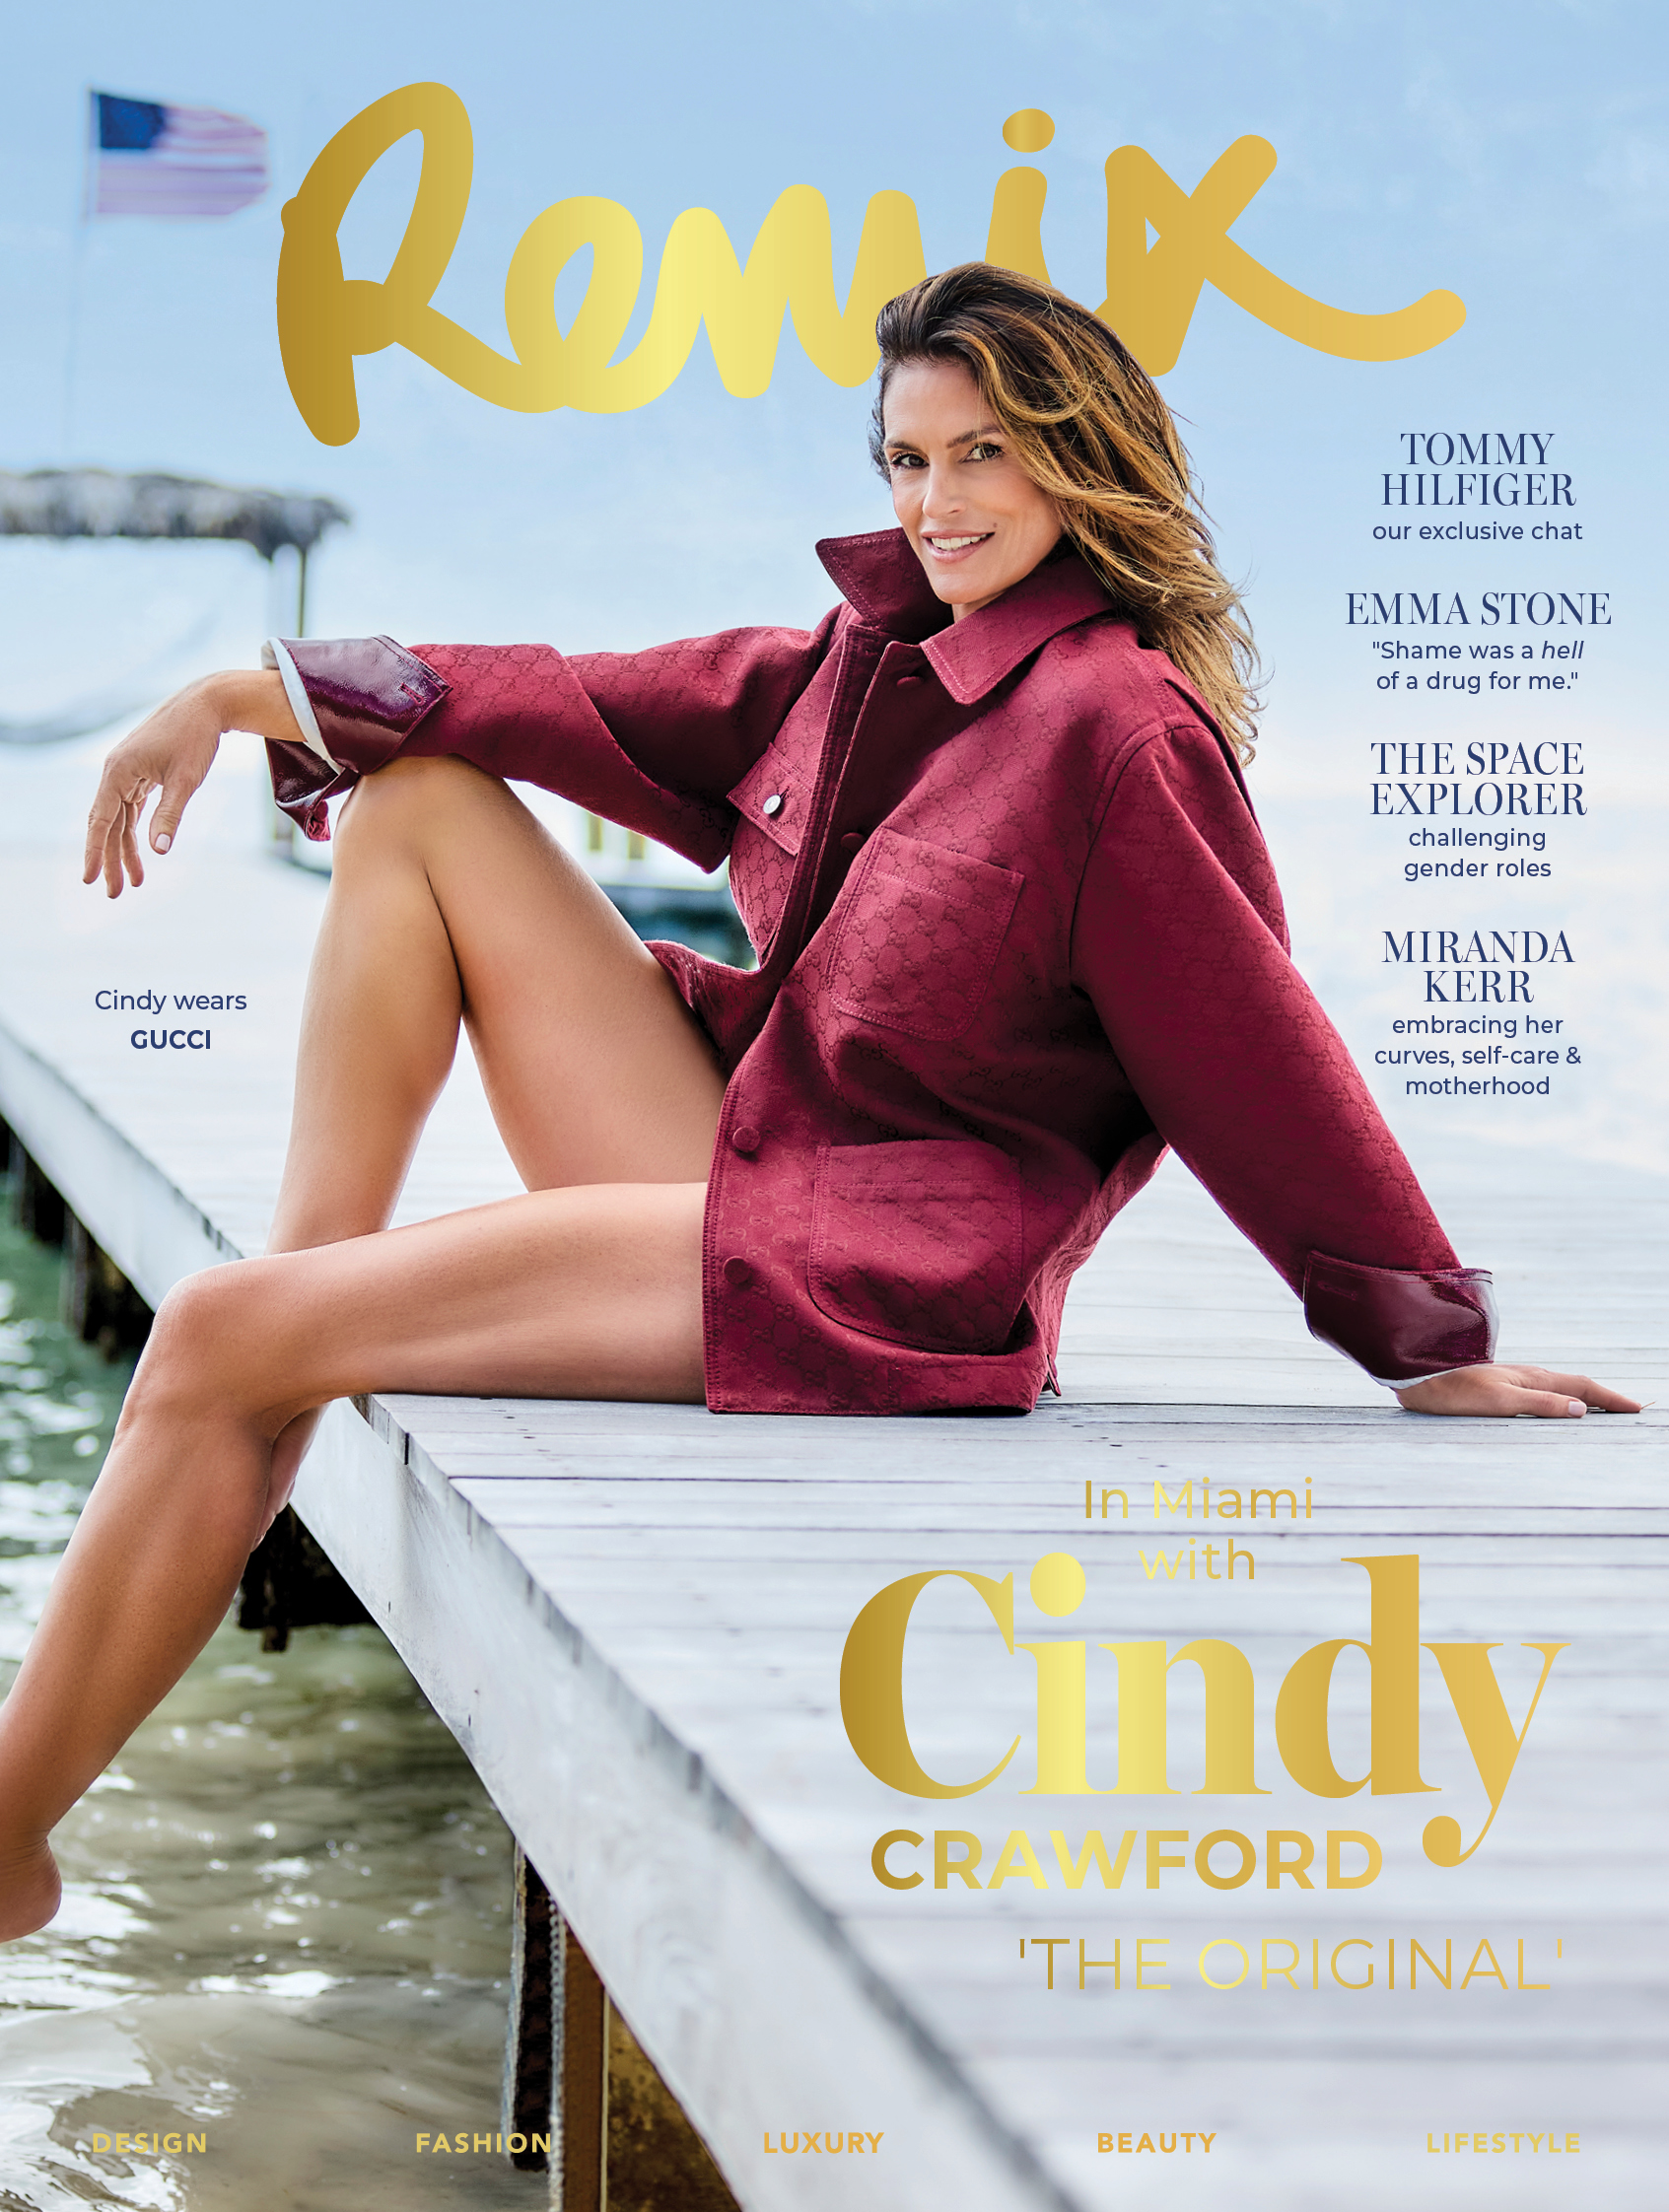 Cindy posed in a maroon jacket for the cover of Remix magazine